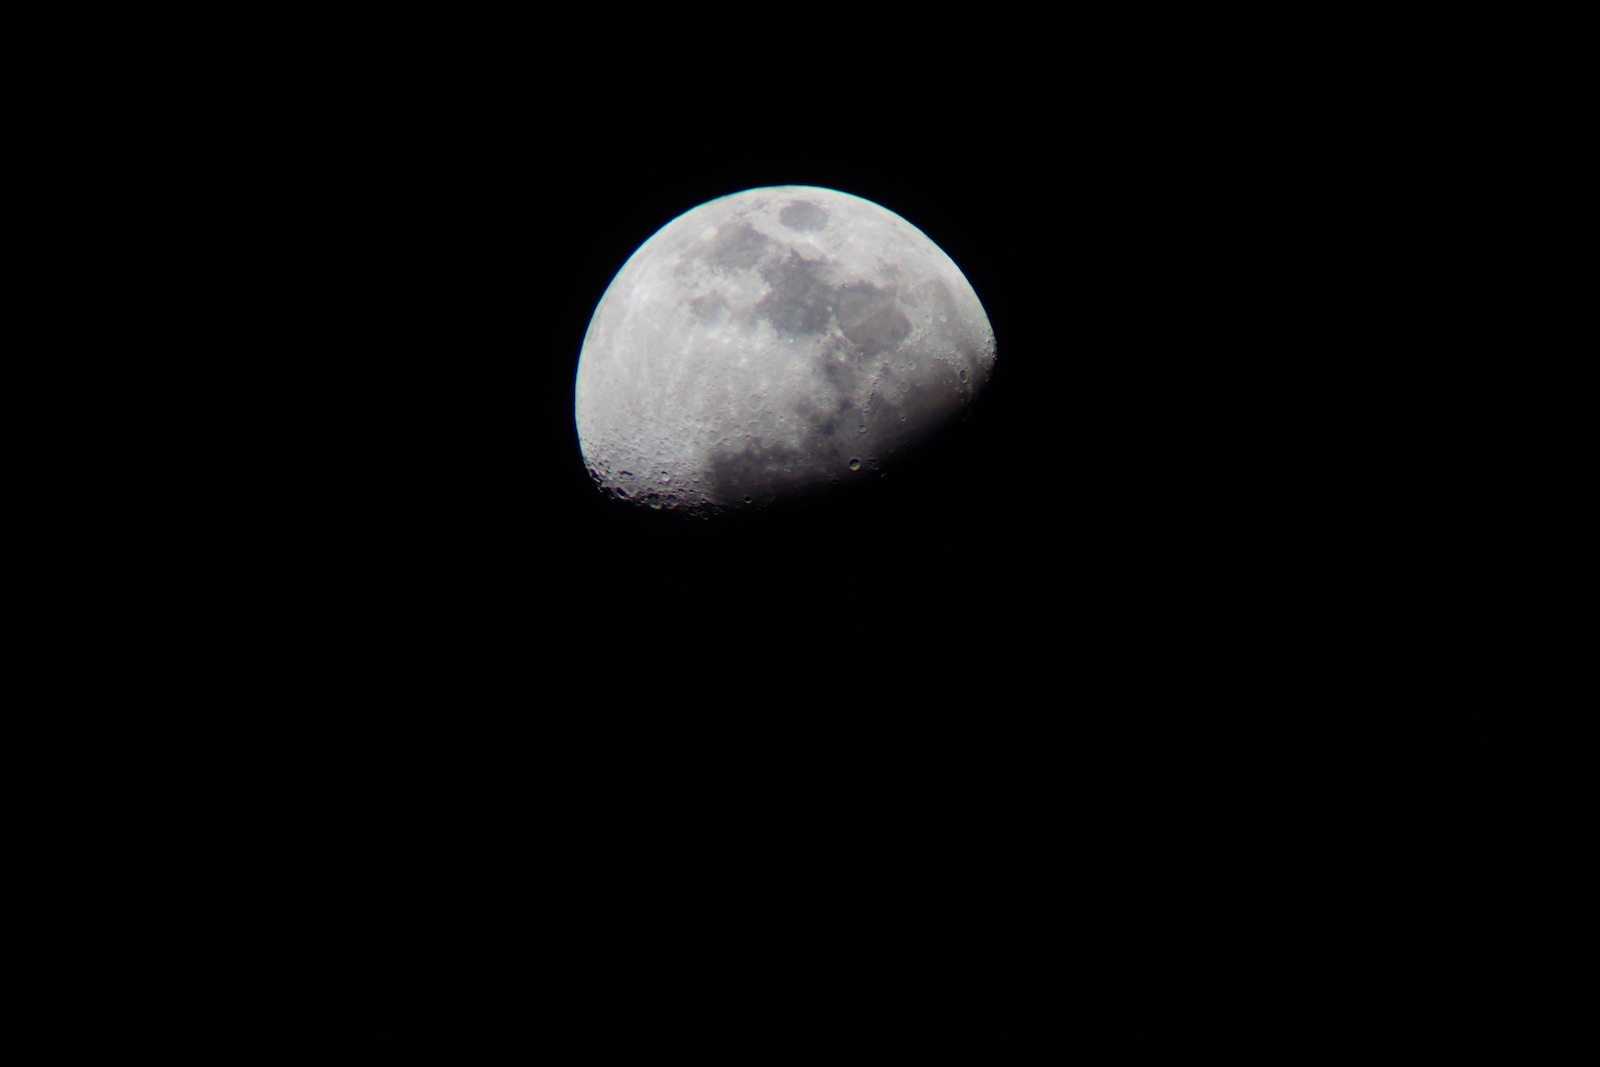 Craters on the moon were clearly visible during Public Night at the Georgia Tech Observatory. Photo taken Feb. 10 by Nathan Touchberry.